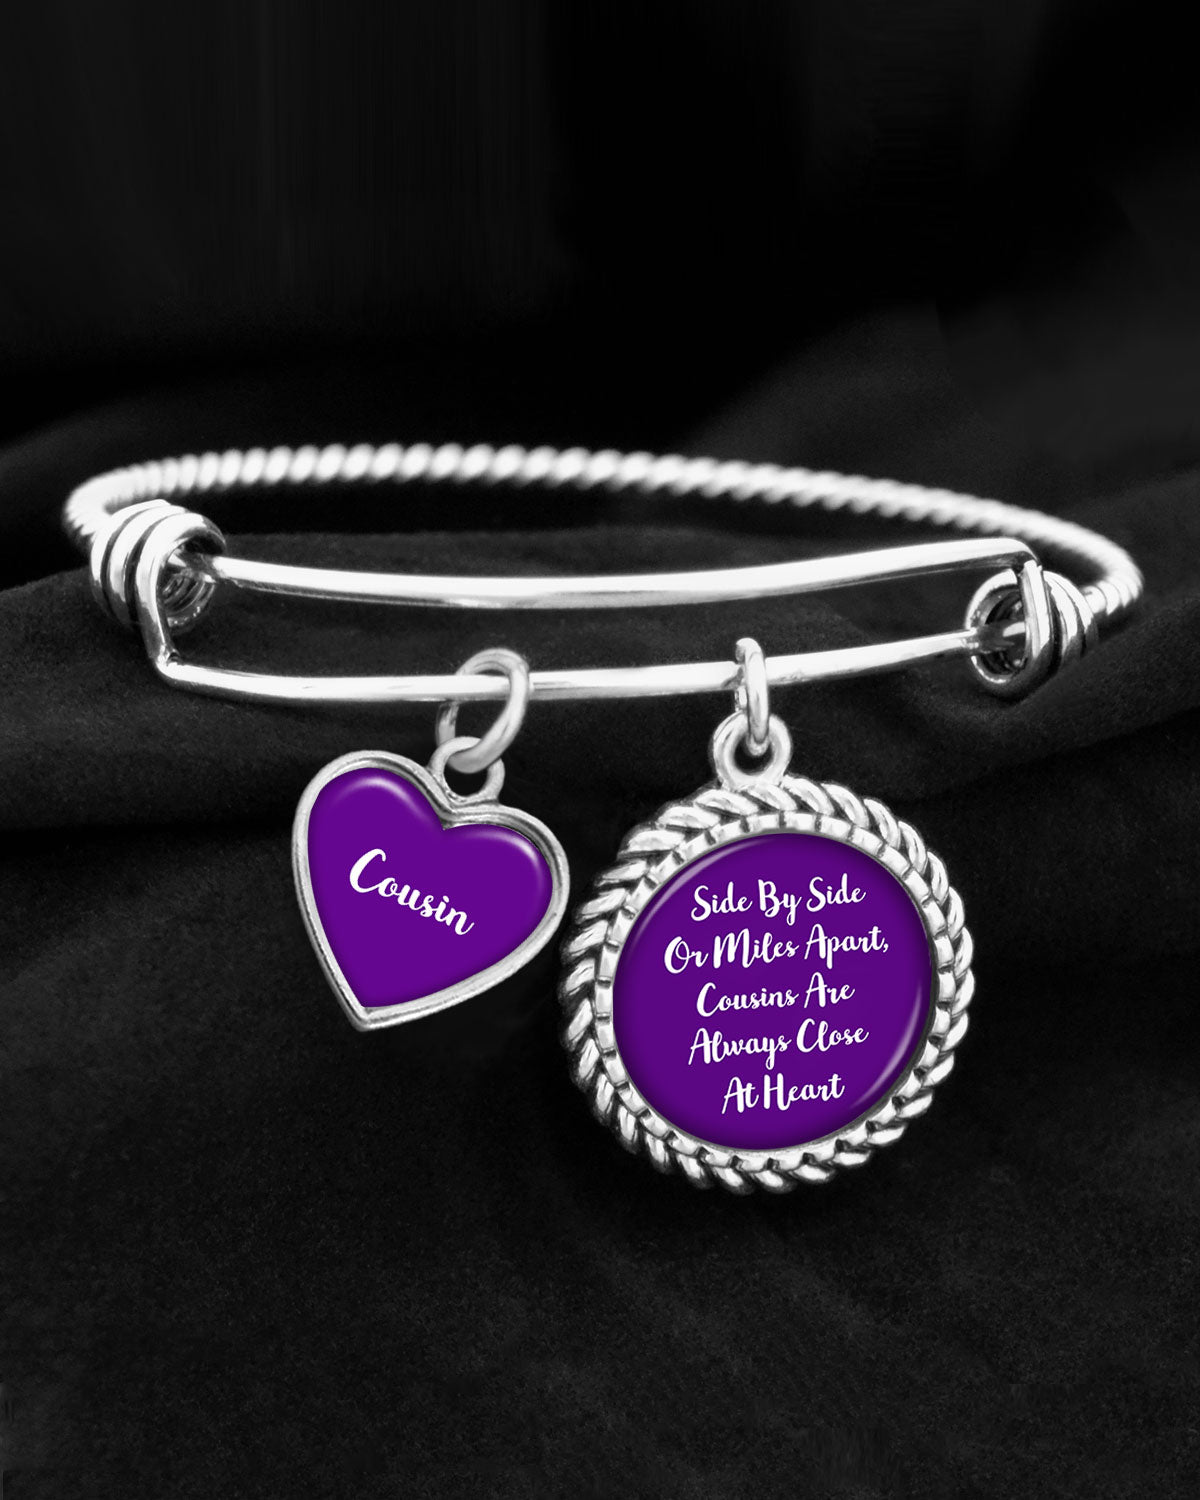 Cousins Are Always Close At Heart Charm Bracelet